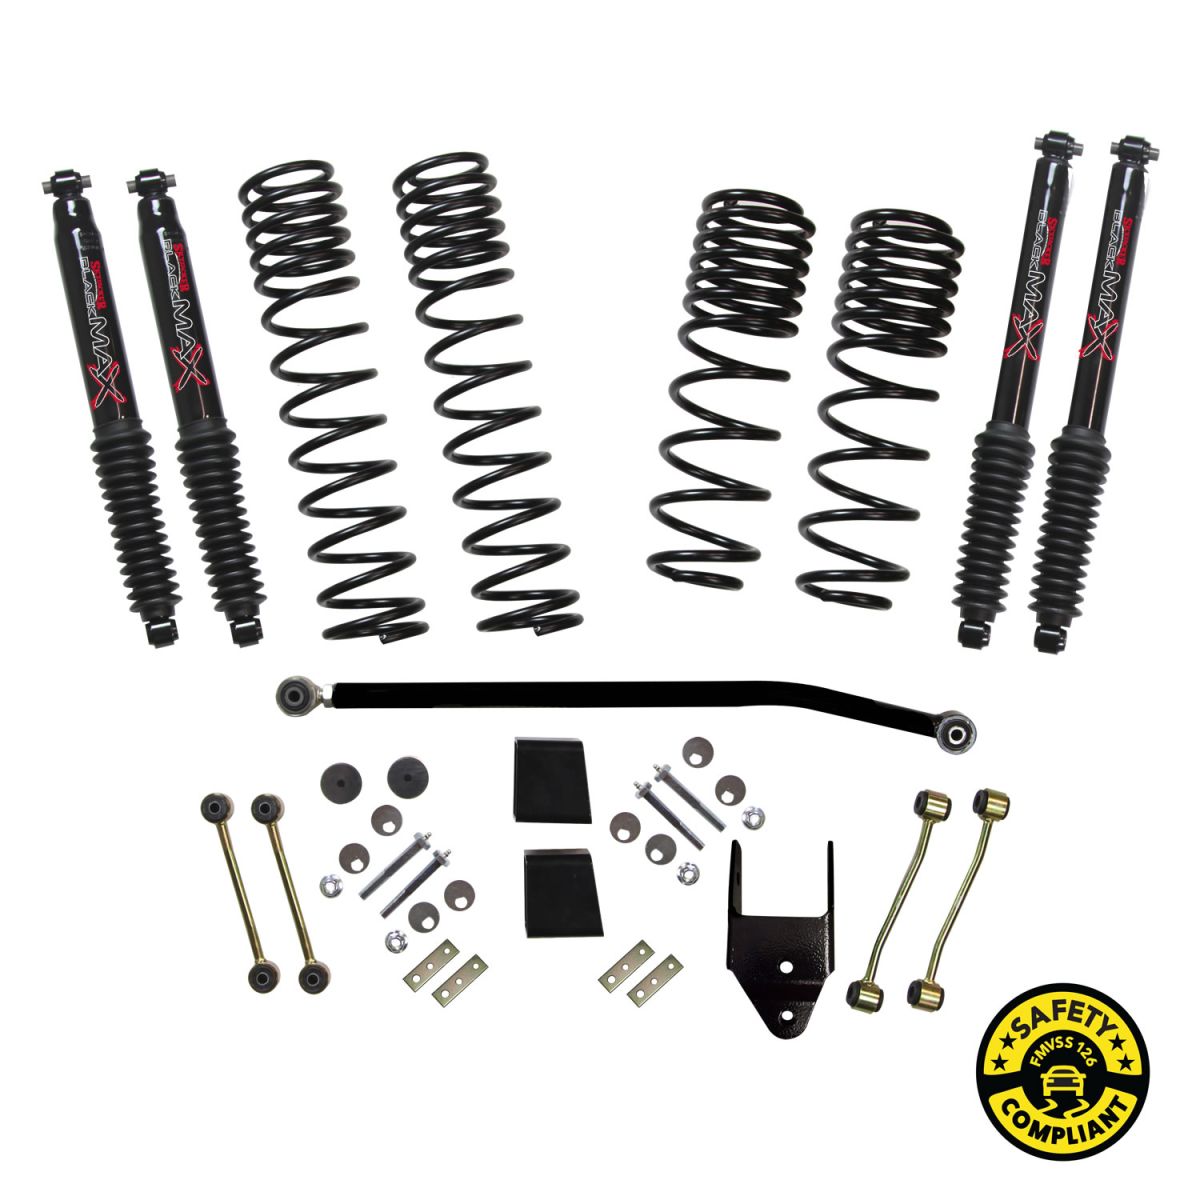 Skyjacker Suspension - Skyjacker Dual Rate Long Travel 3.5-4" Lift Kit System with Black MAX Shocks For 18-20 Jeep Wrangler JL Unlimited Four Door